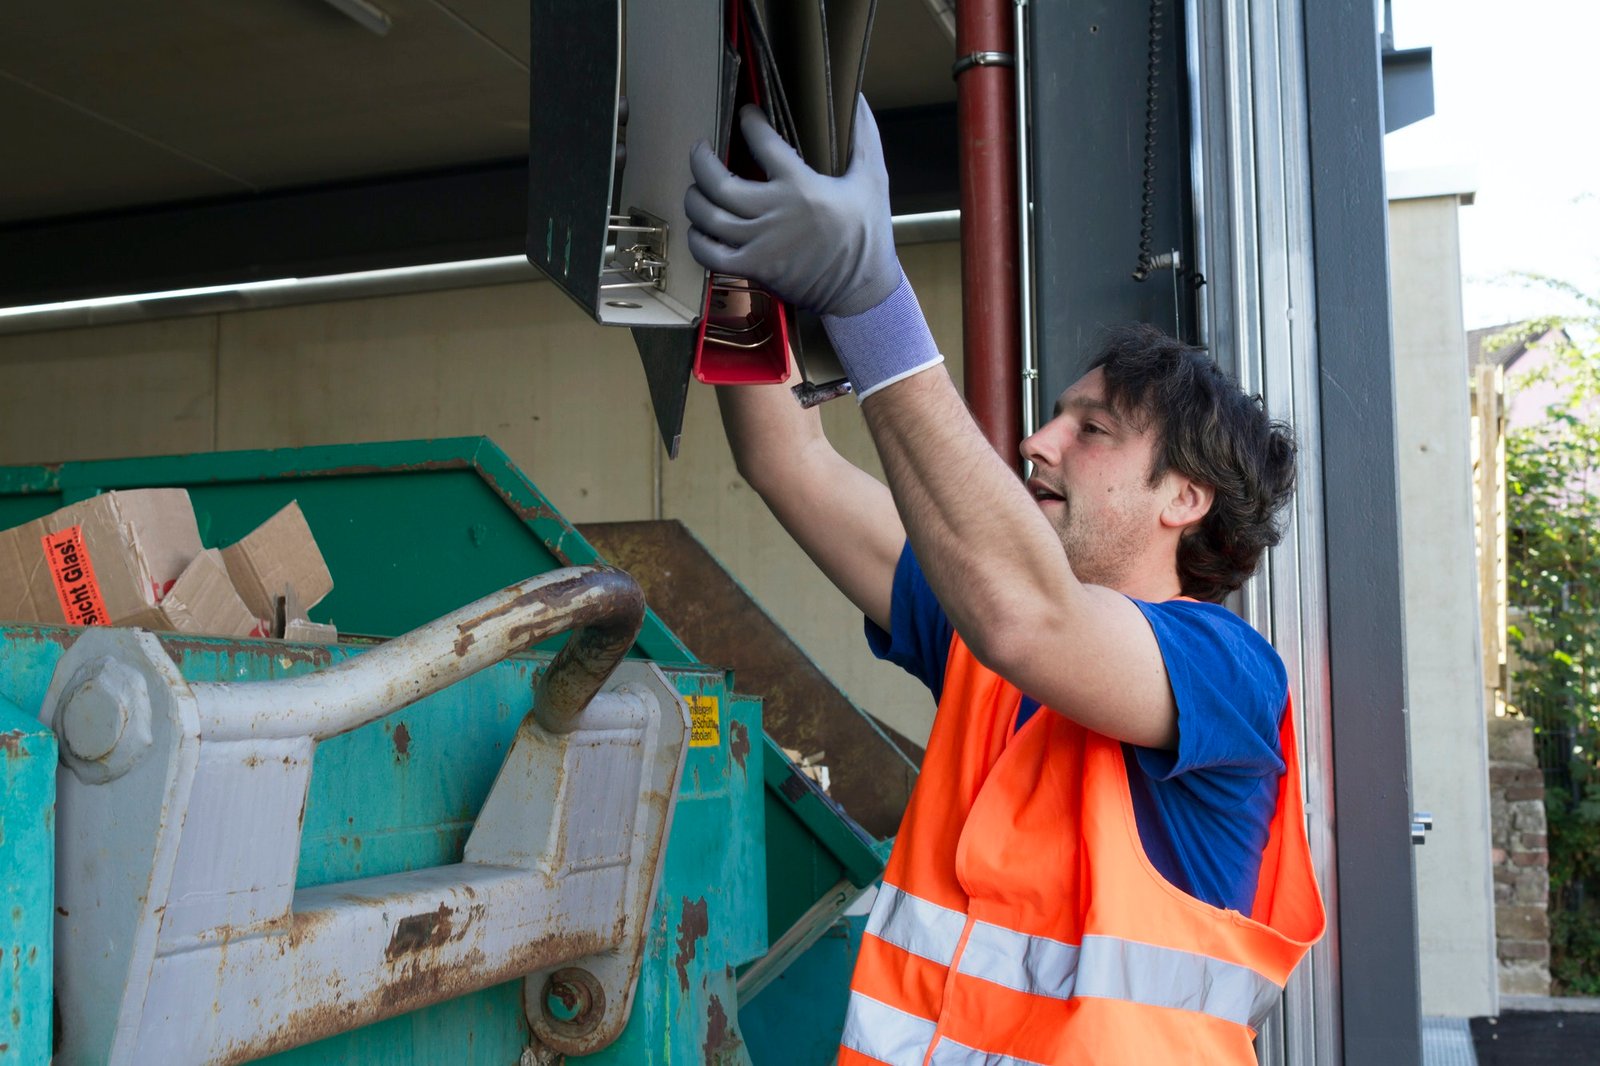 worker-at-a-waste-container-throwing-away-folders.jpg